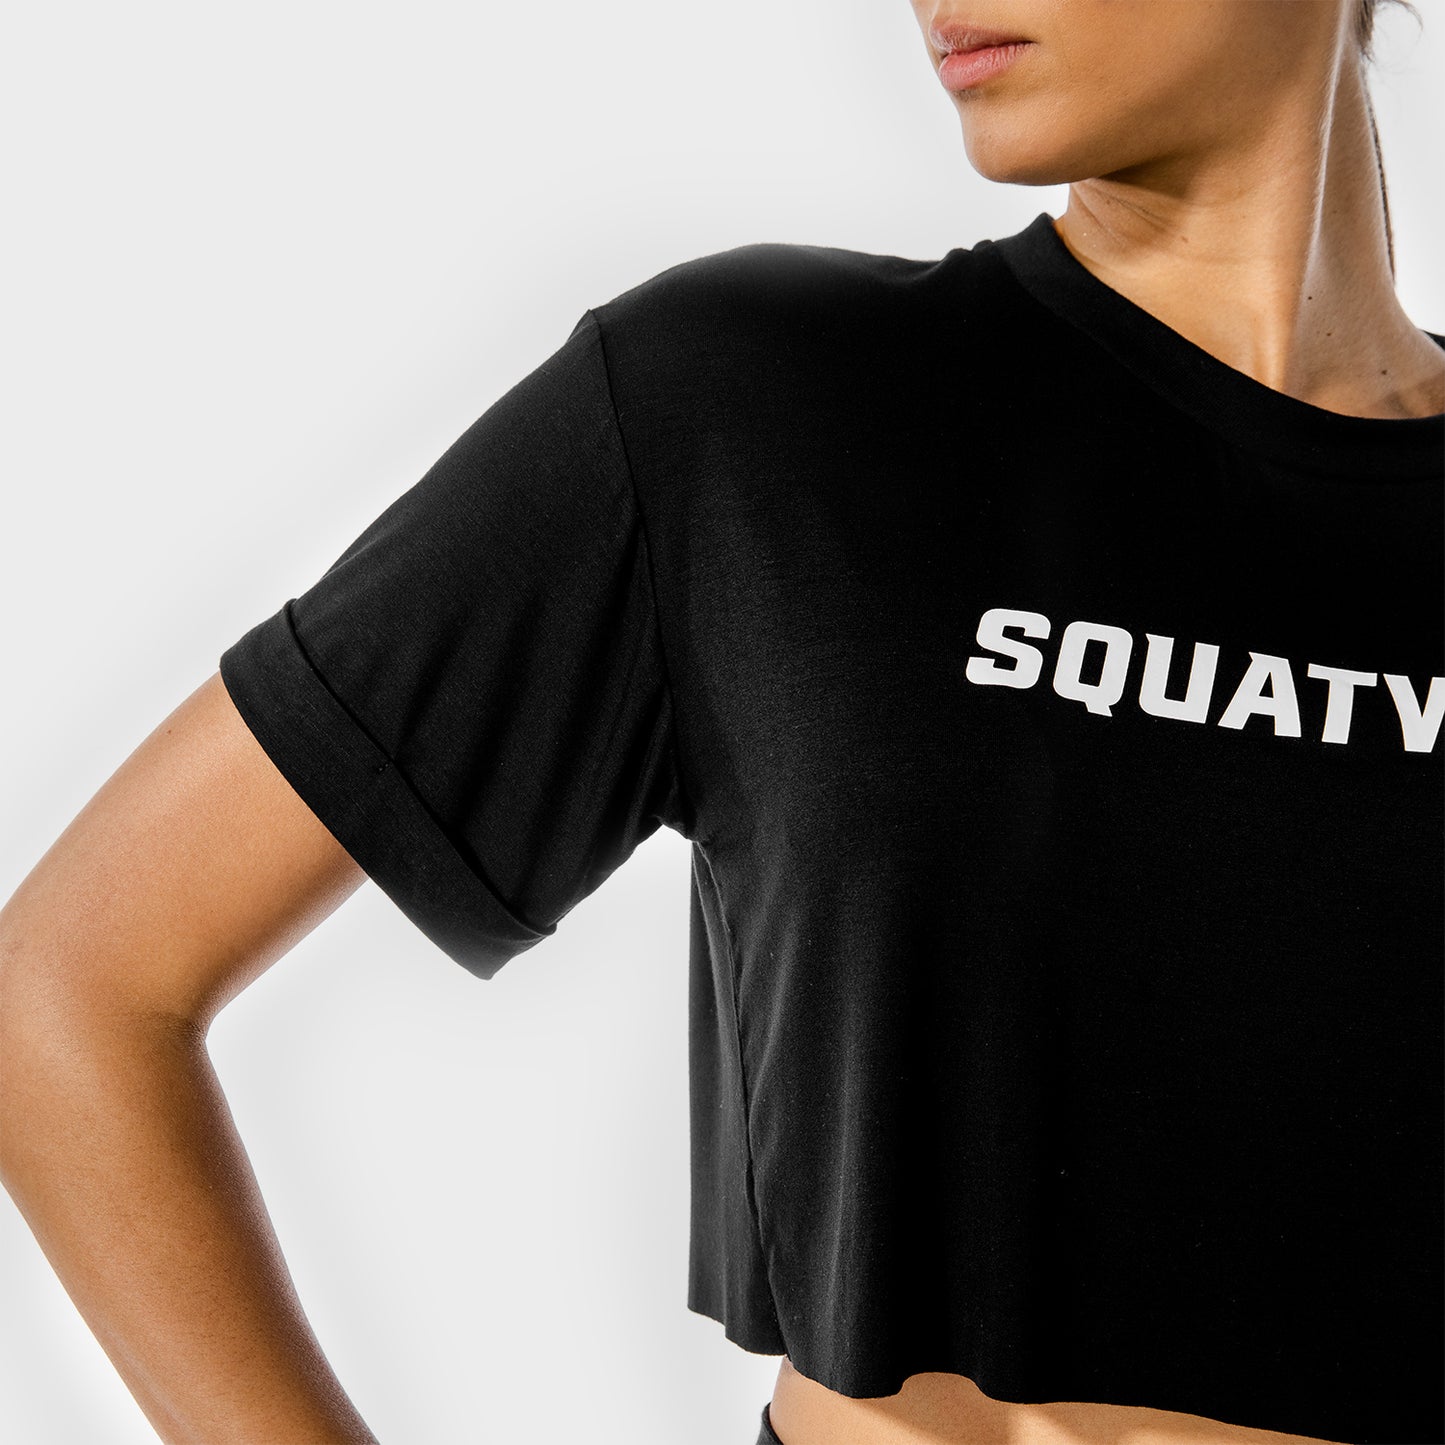 squatwolf-gym-t-shirts-for-women-iconic-crop-tee-black-workout-clothes